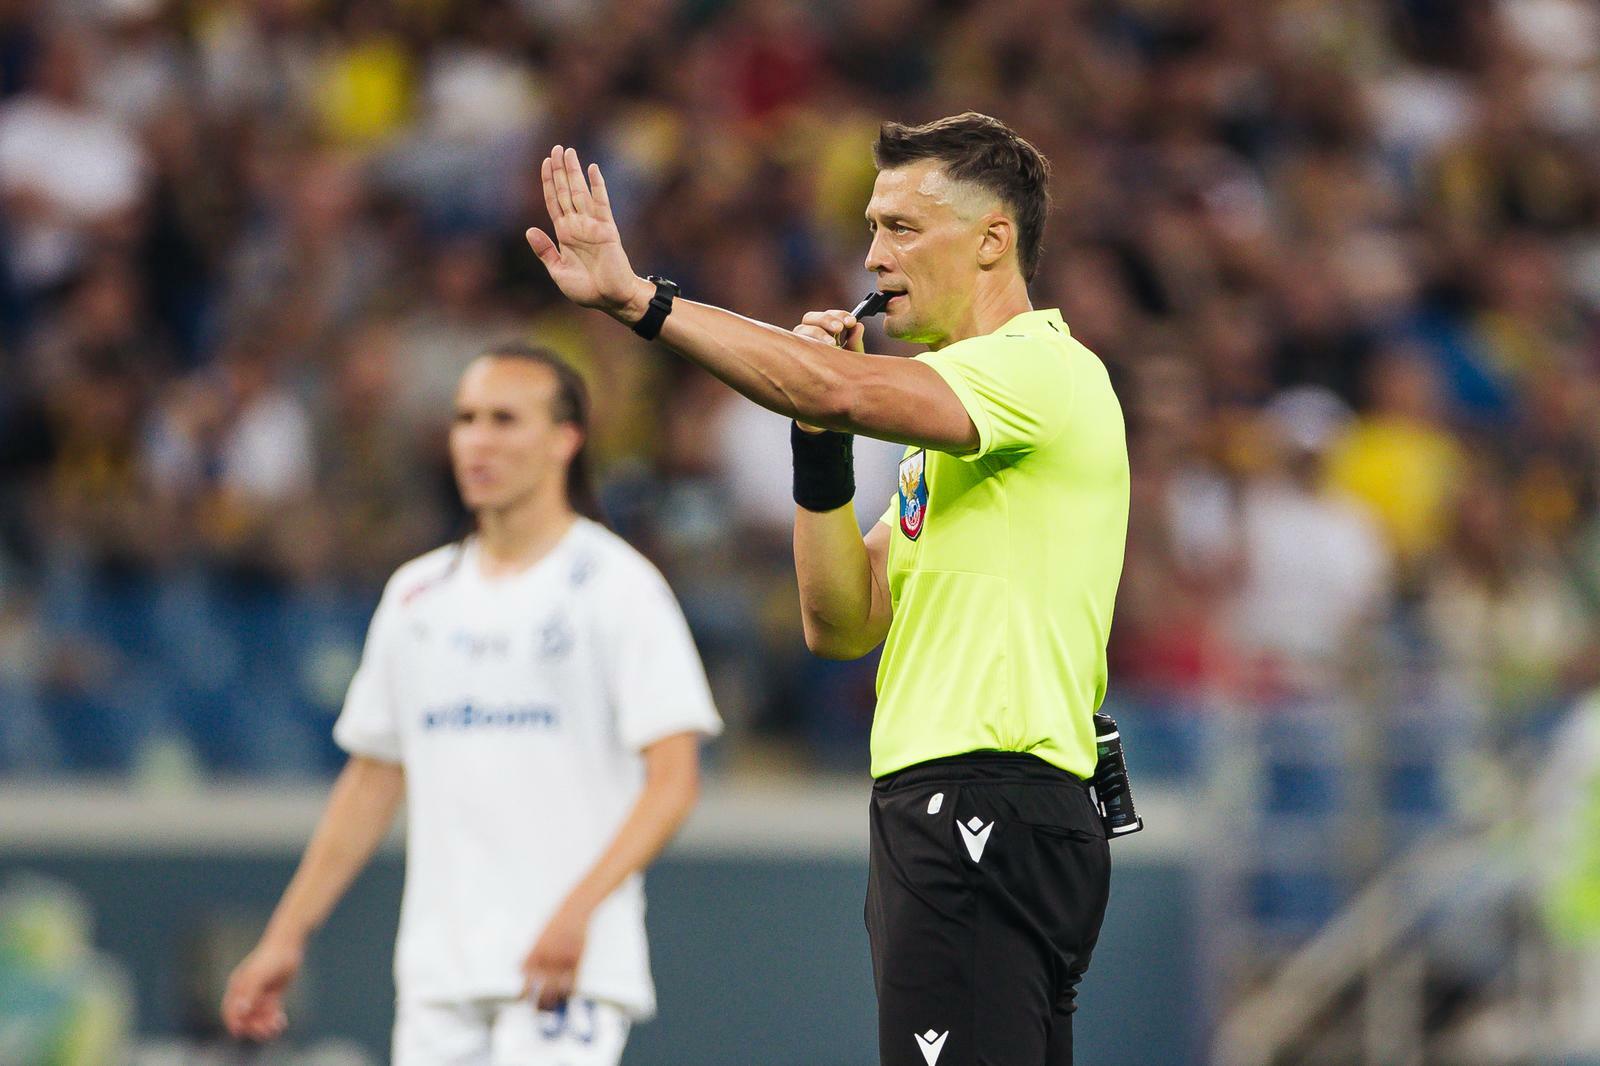 FC Dynamo Moscow News | Vasily Kazartsev appointed as the main referee for the Ural - Dynamo match. Official Dynamo club website.